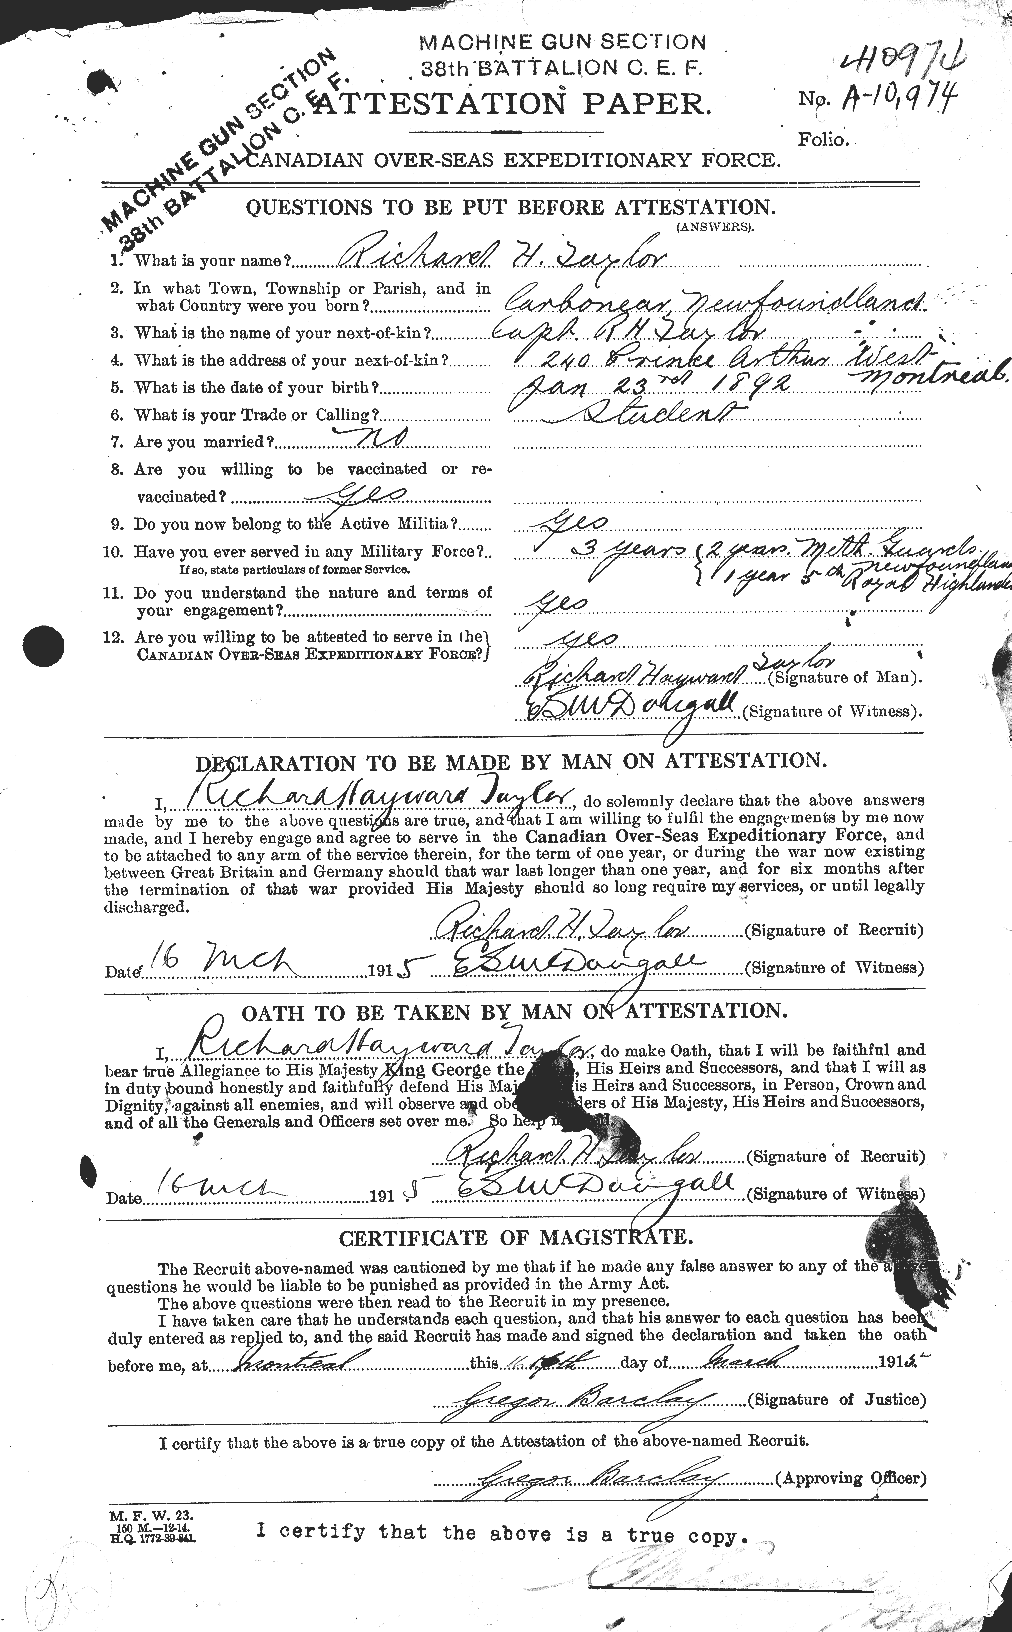 Personnel Records of the First World War - CEF 627829a